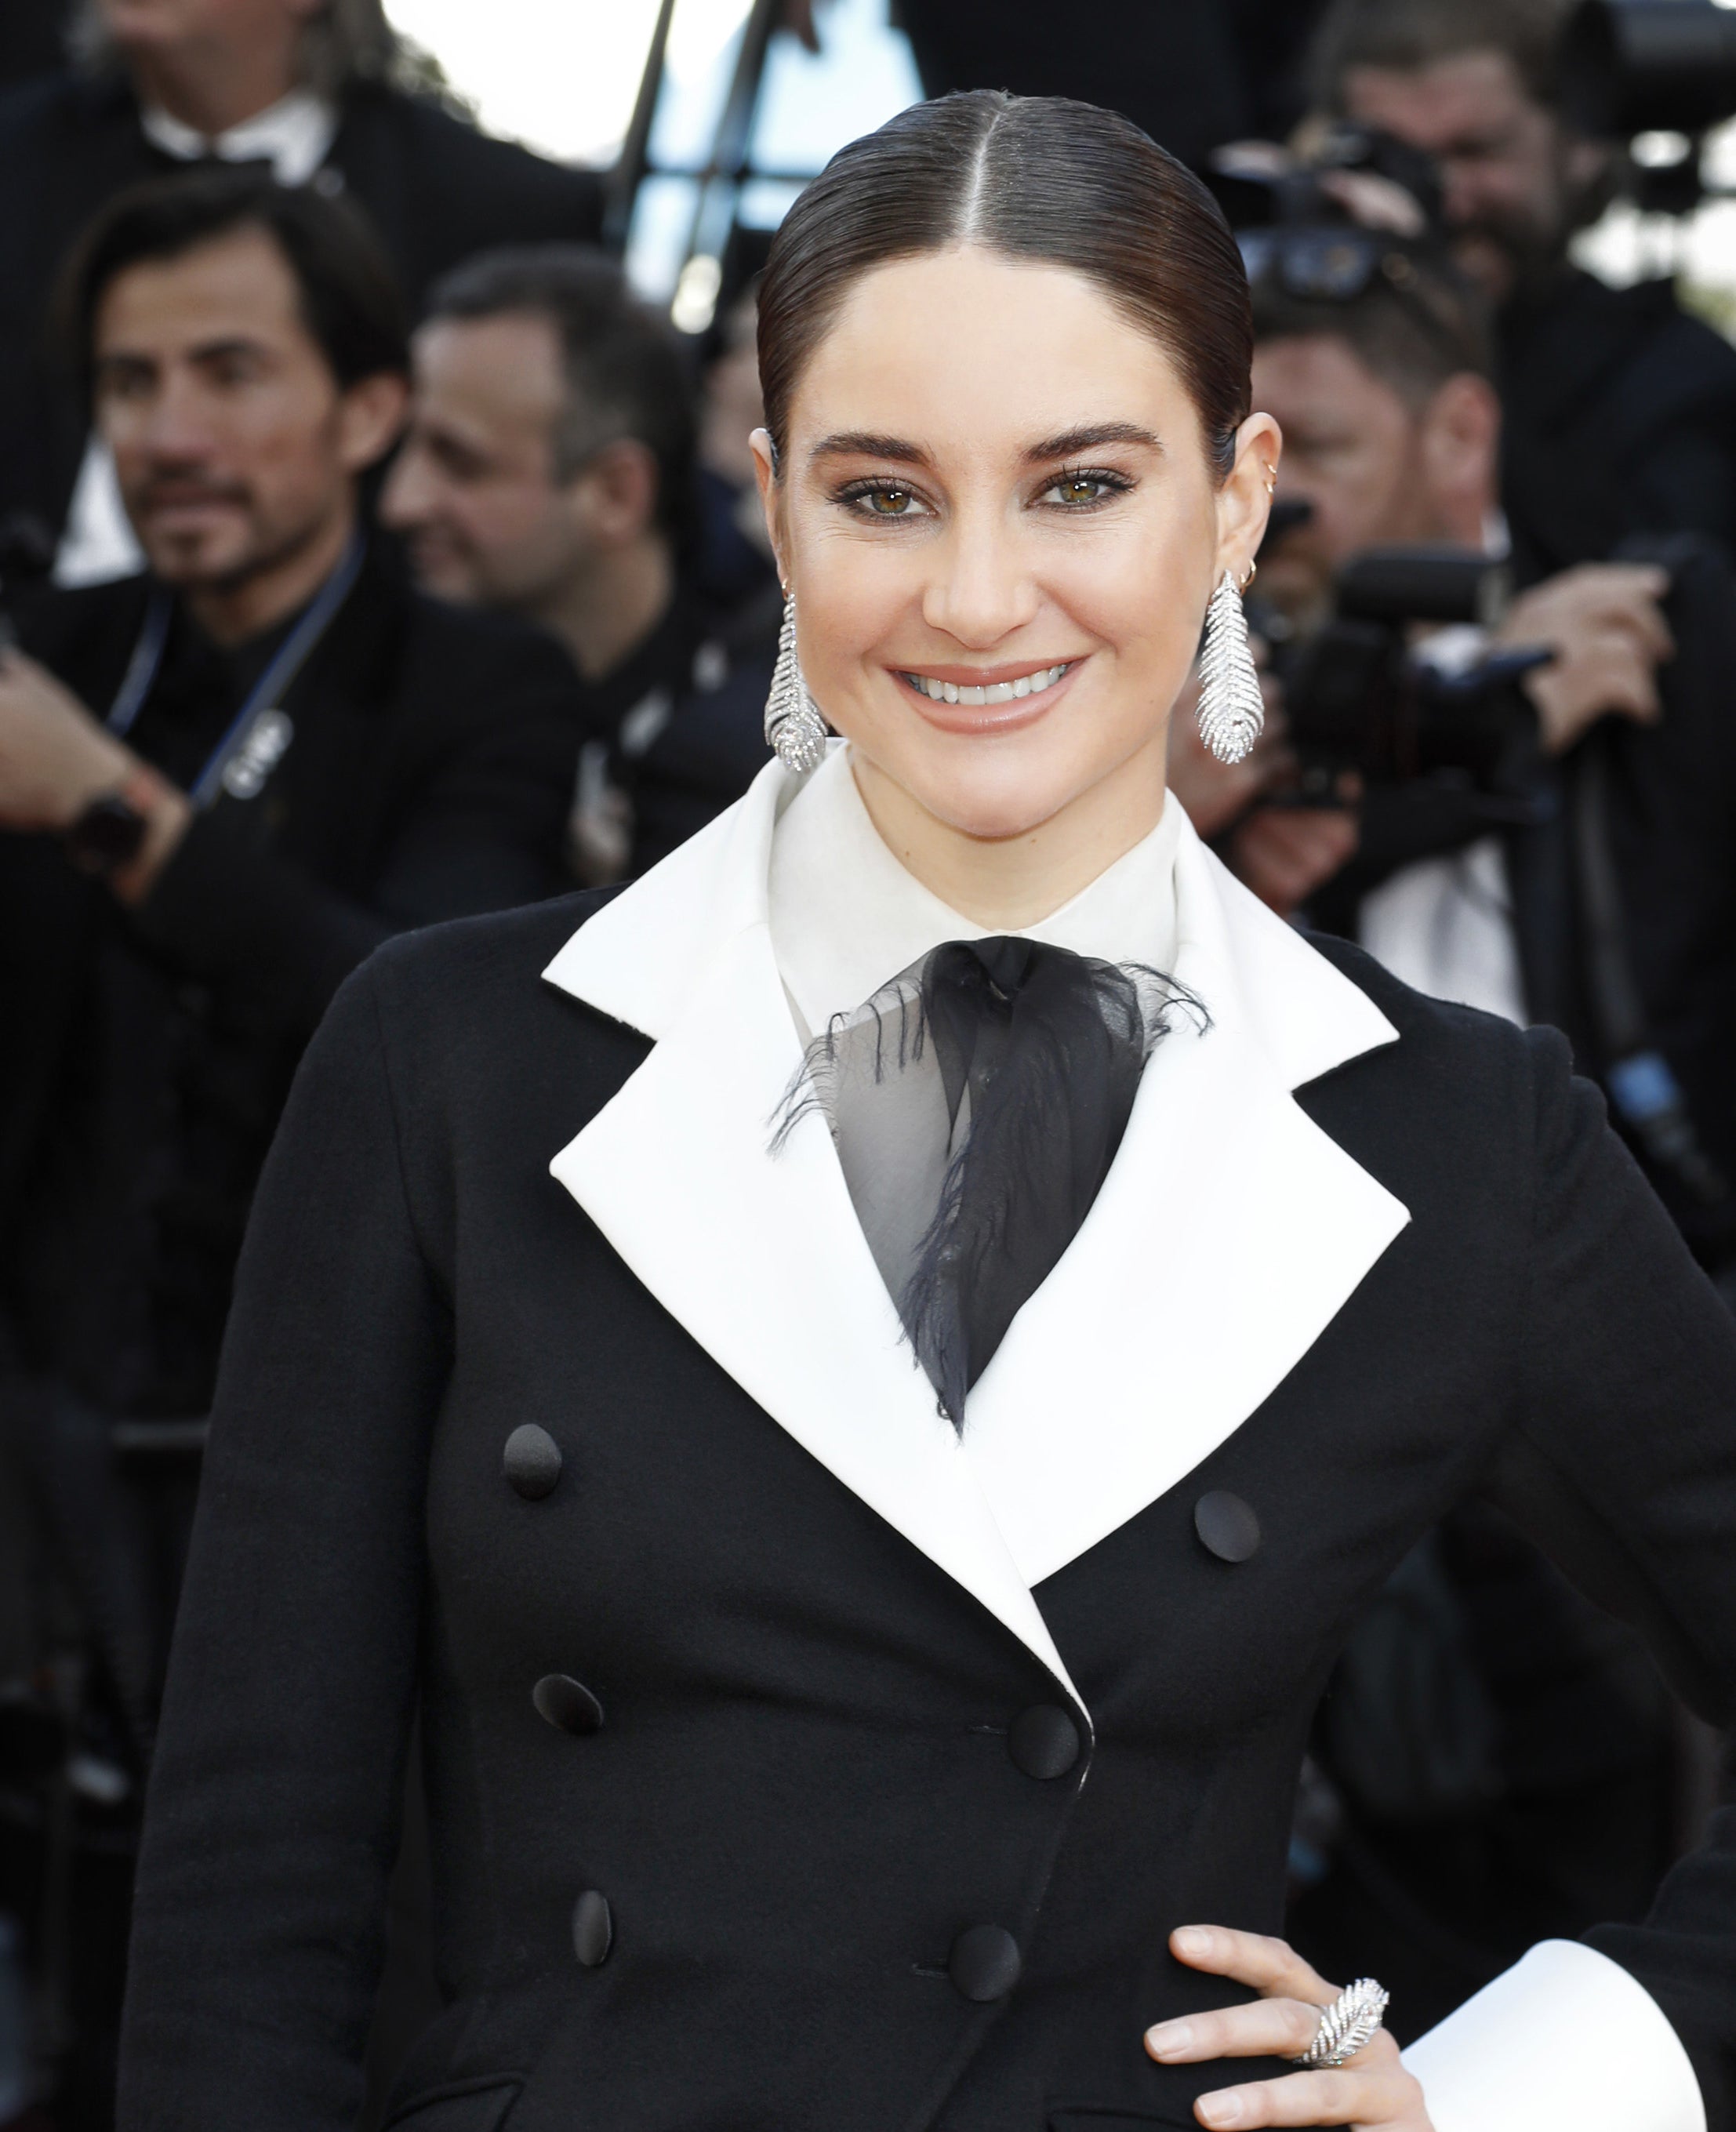 Shailene Woodley is pictured at a red carpet event in 2019